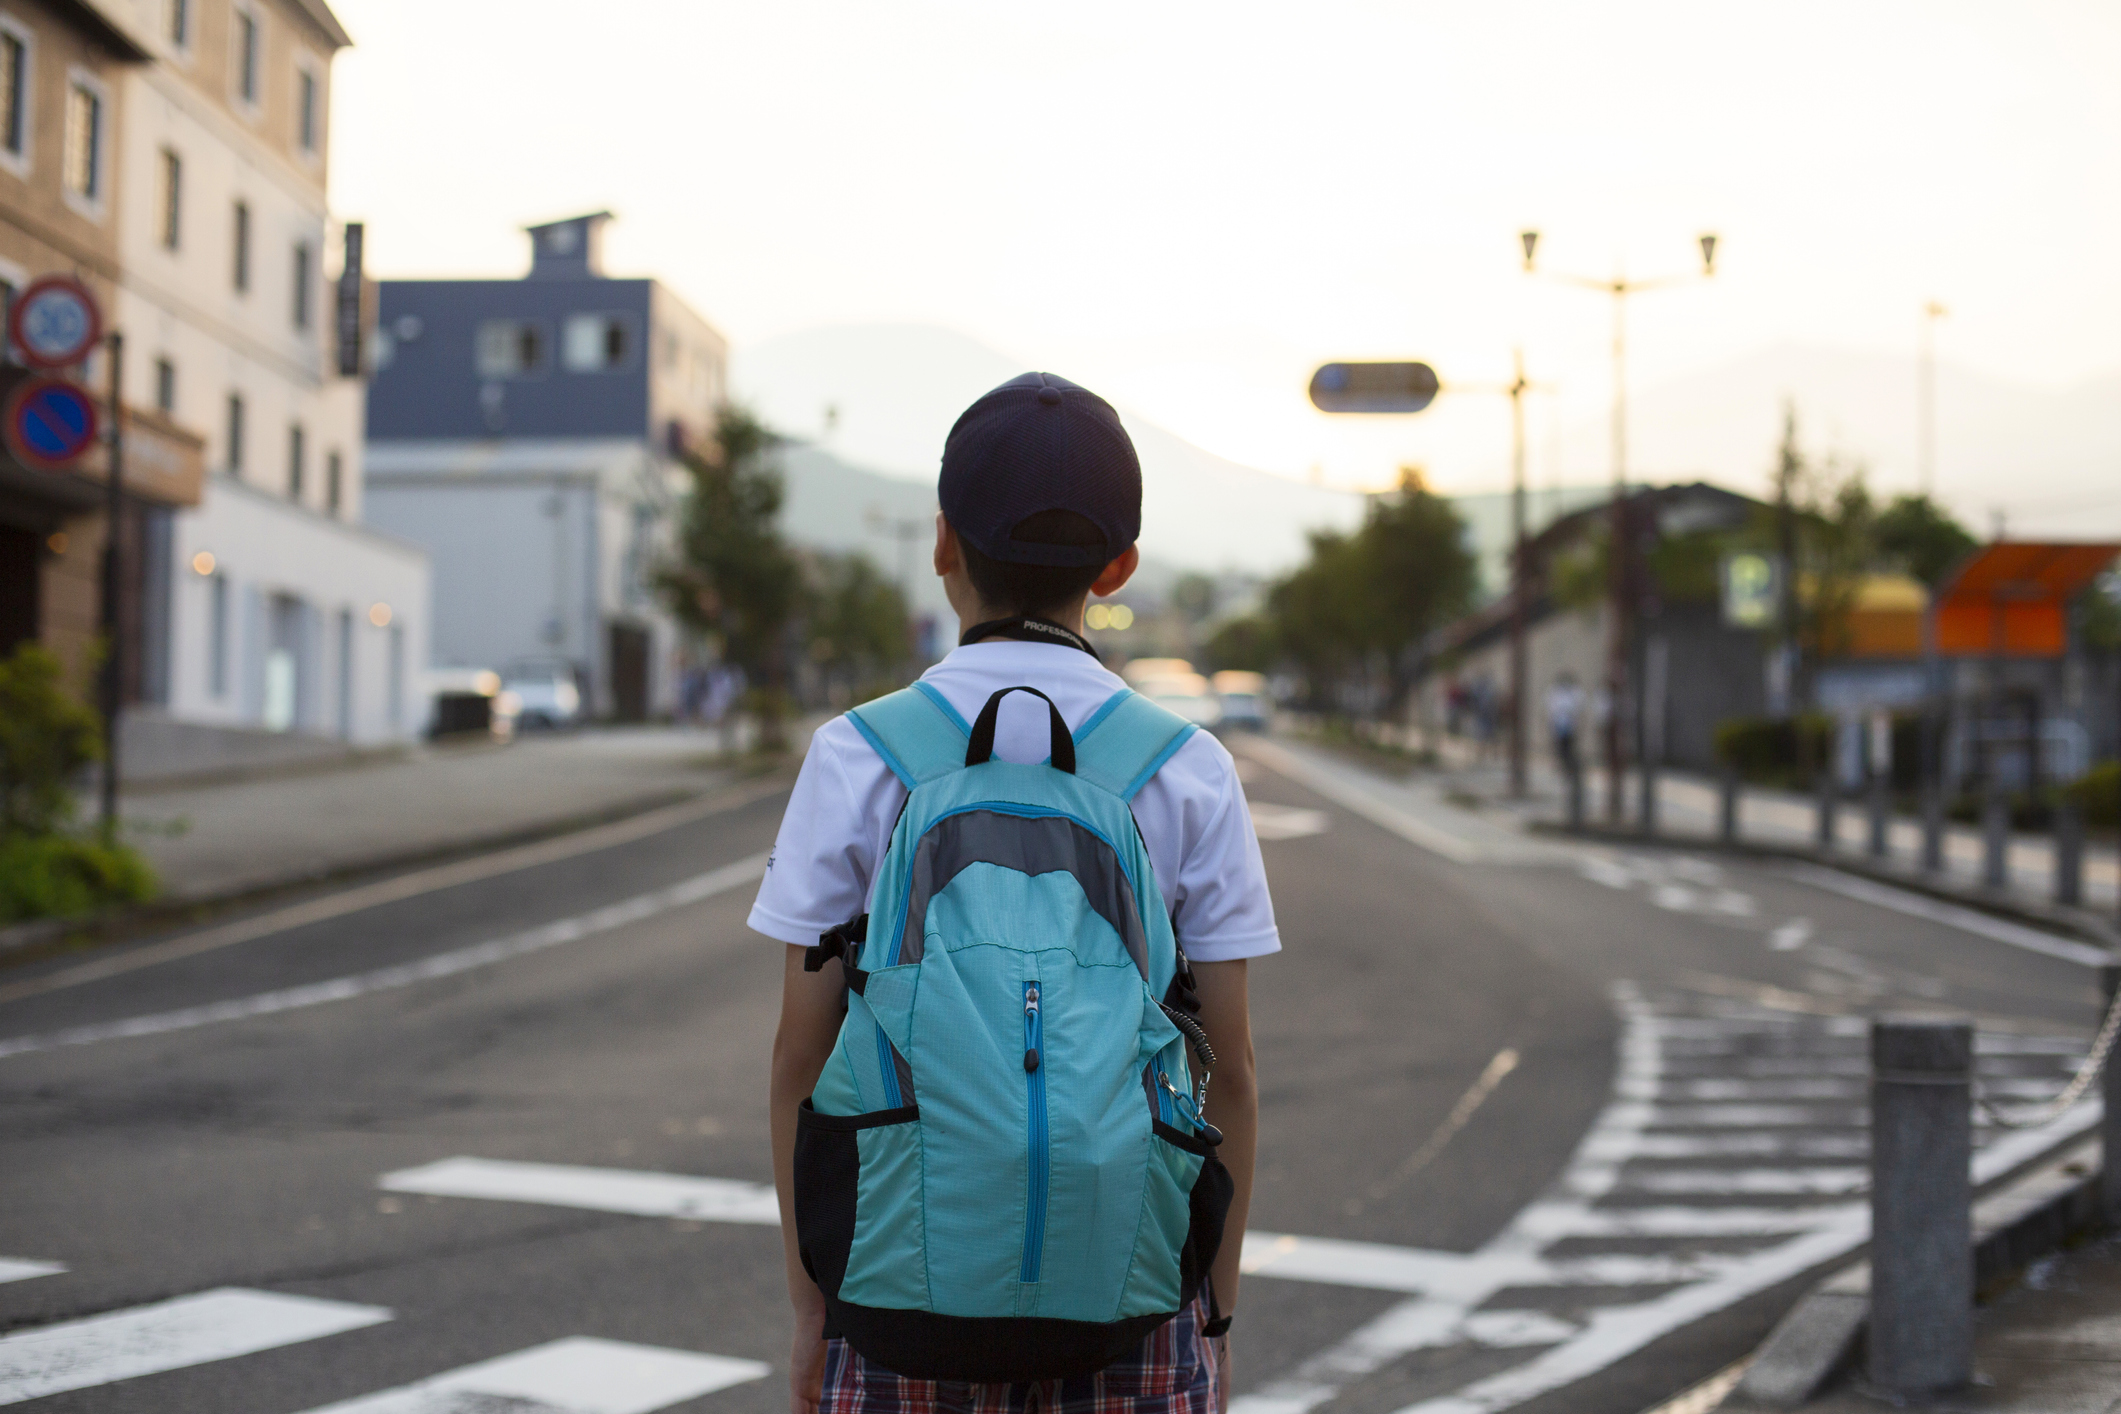 Boy walking home from school | Source: Getty Images